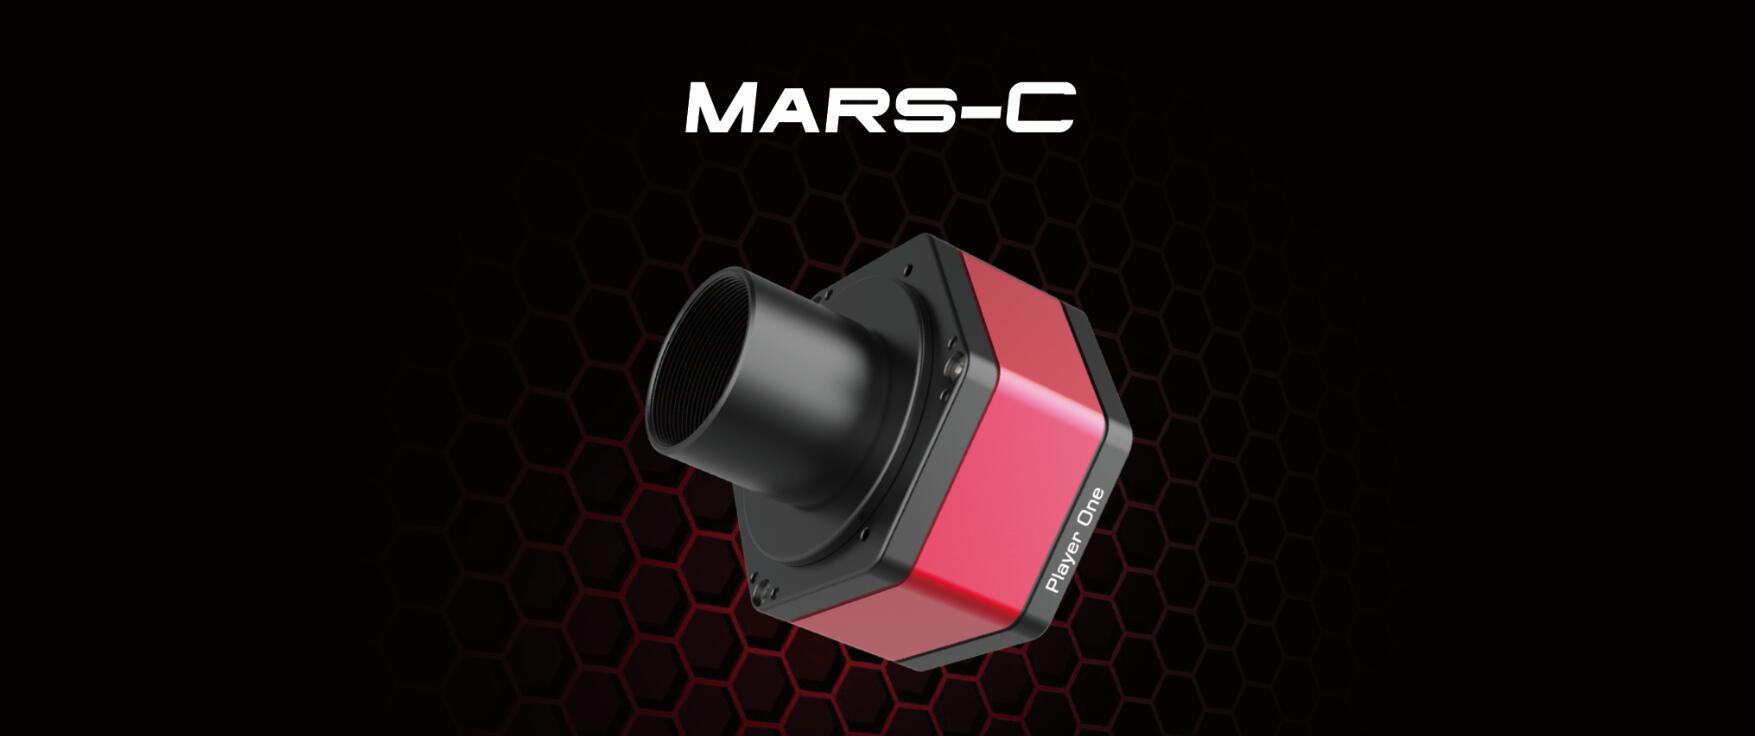 Mars-C Camera (IMX462) released in January